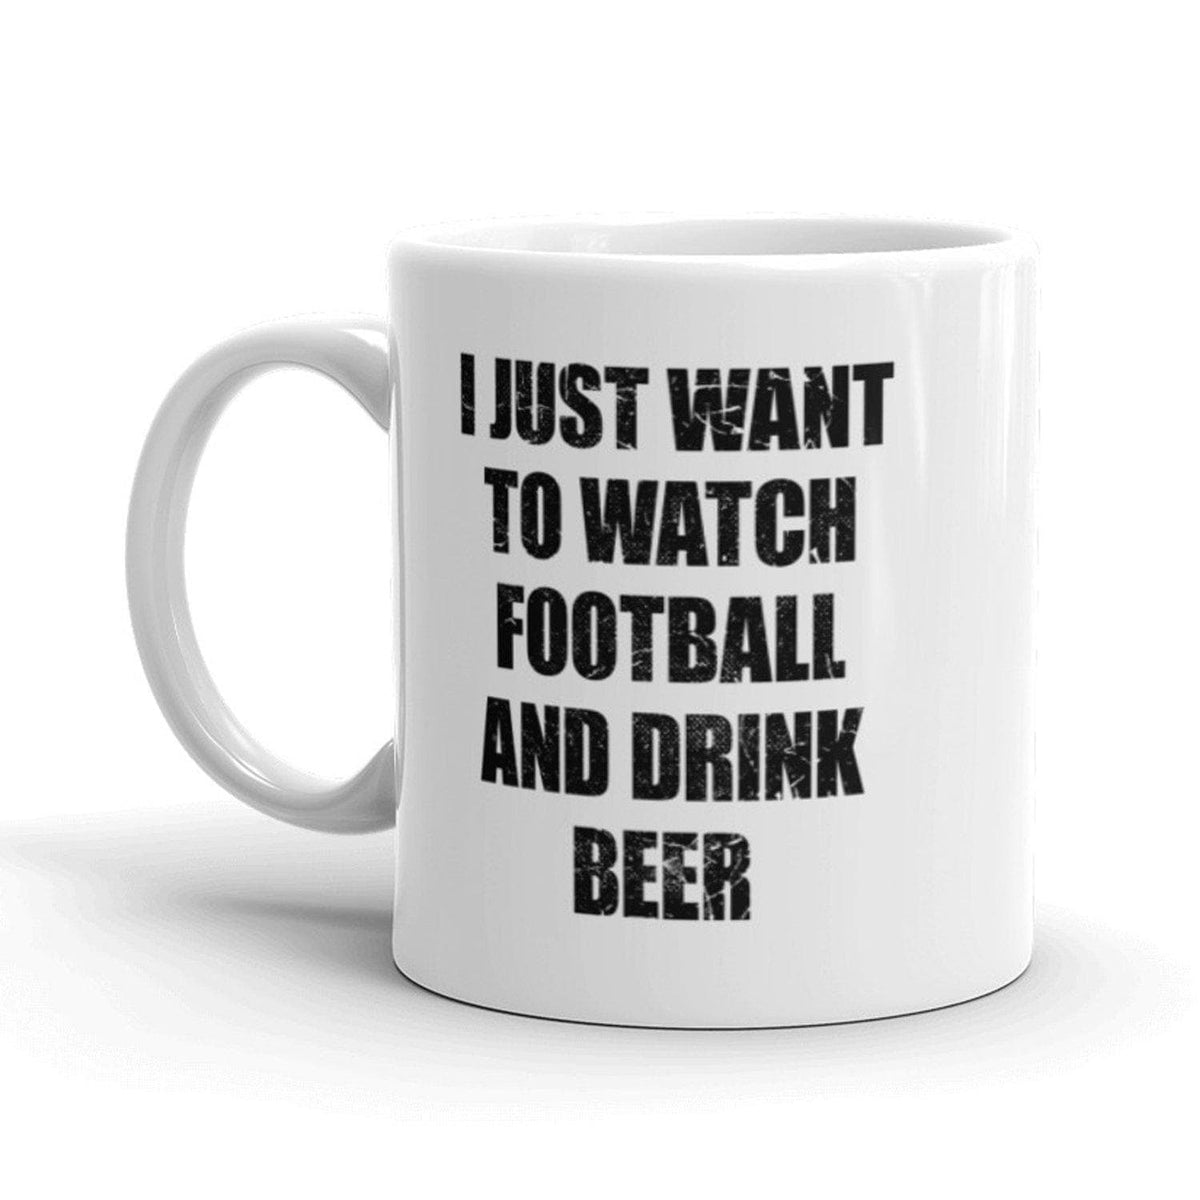 I Just Want To Watch Football And Drink Beer Mug - Crazy Dog T-Shirts